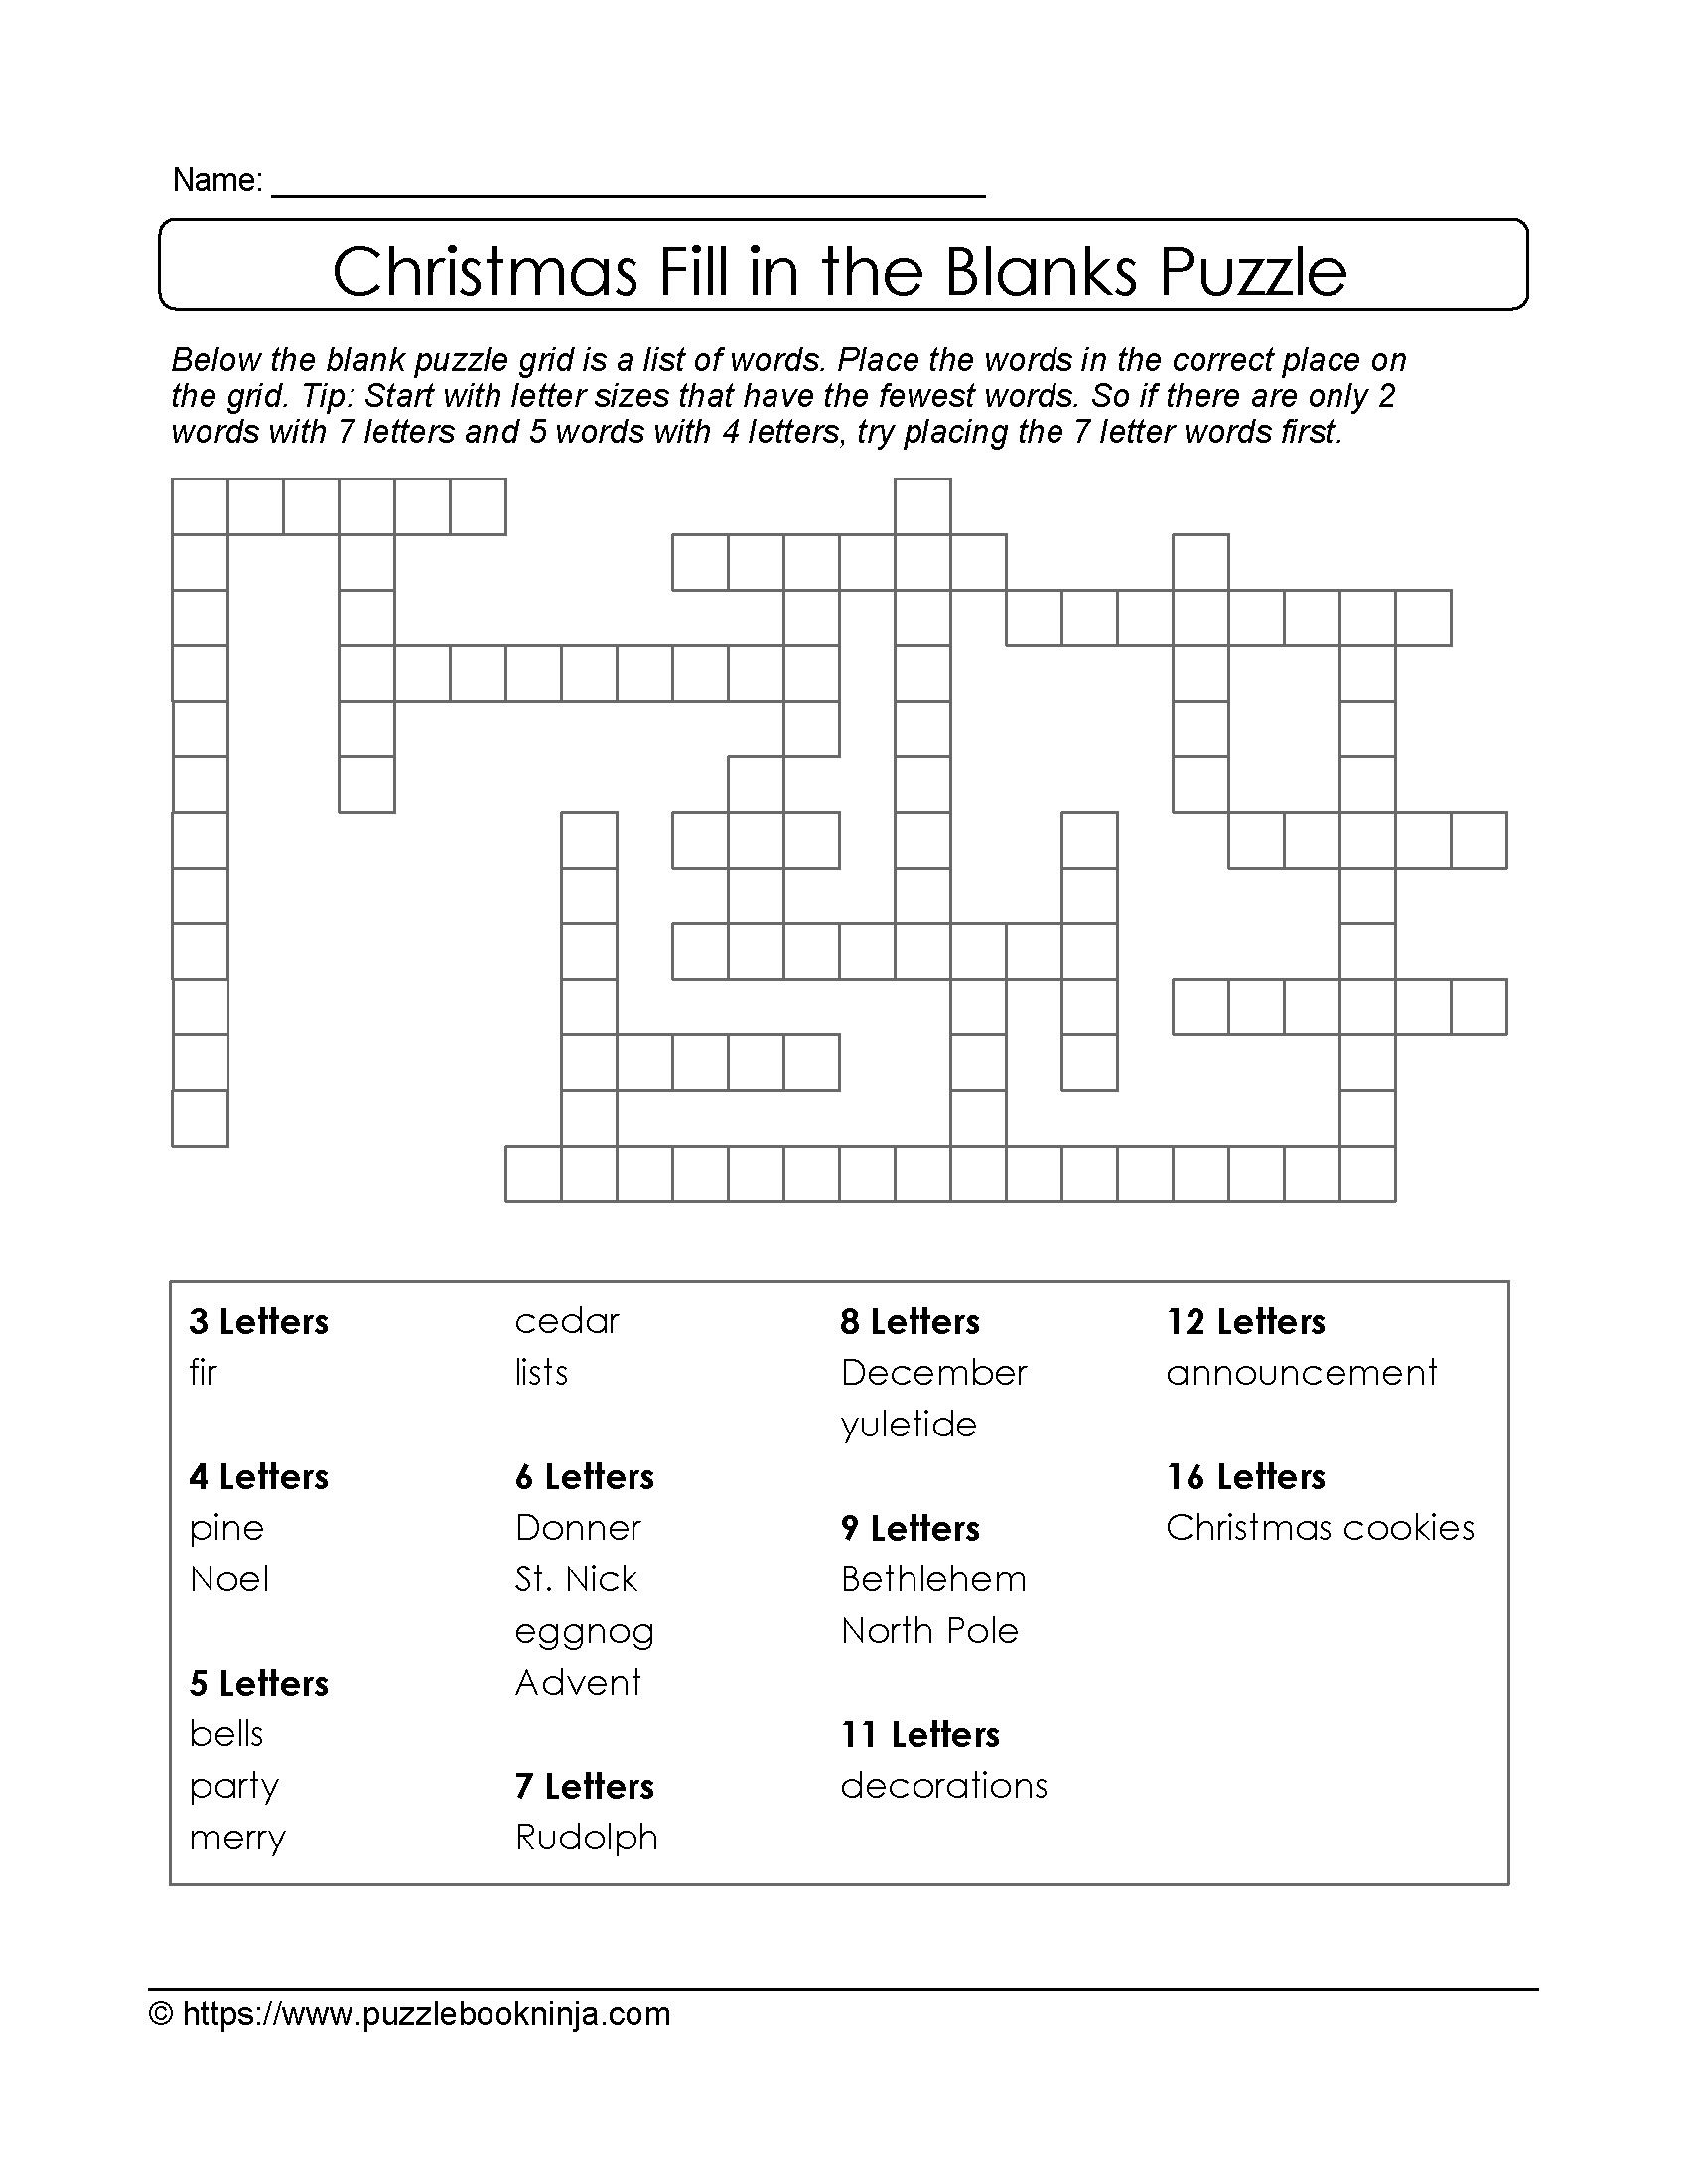 Christmas Printable Puzzle. Free Fill In The Blanks. | Christmas - Printable Xmas Puzzles